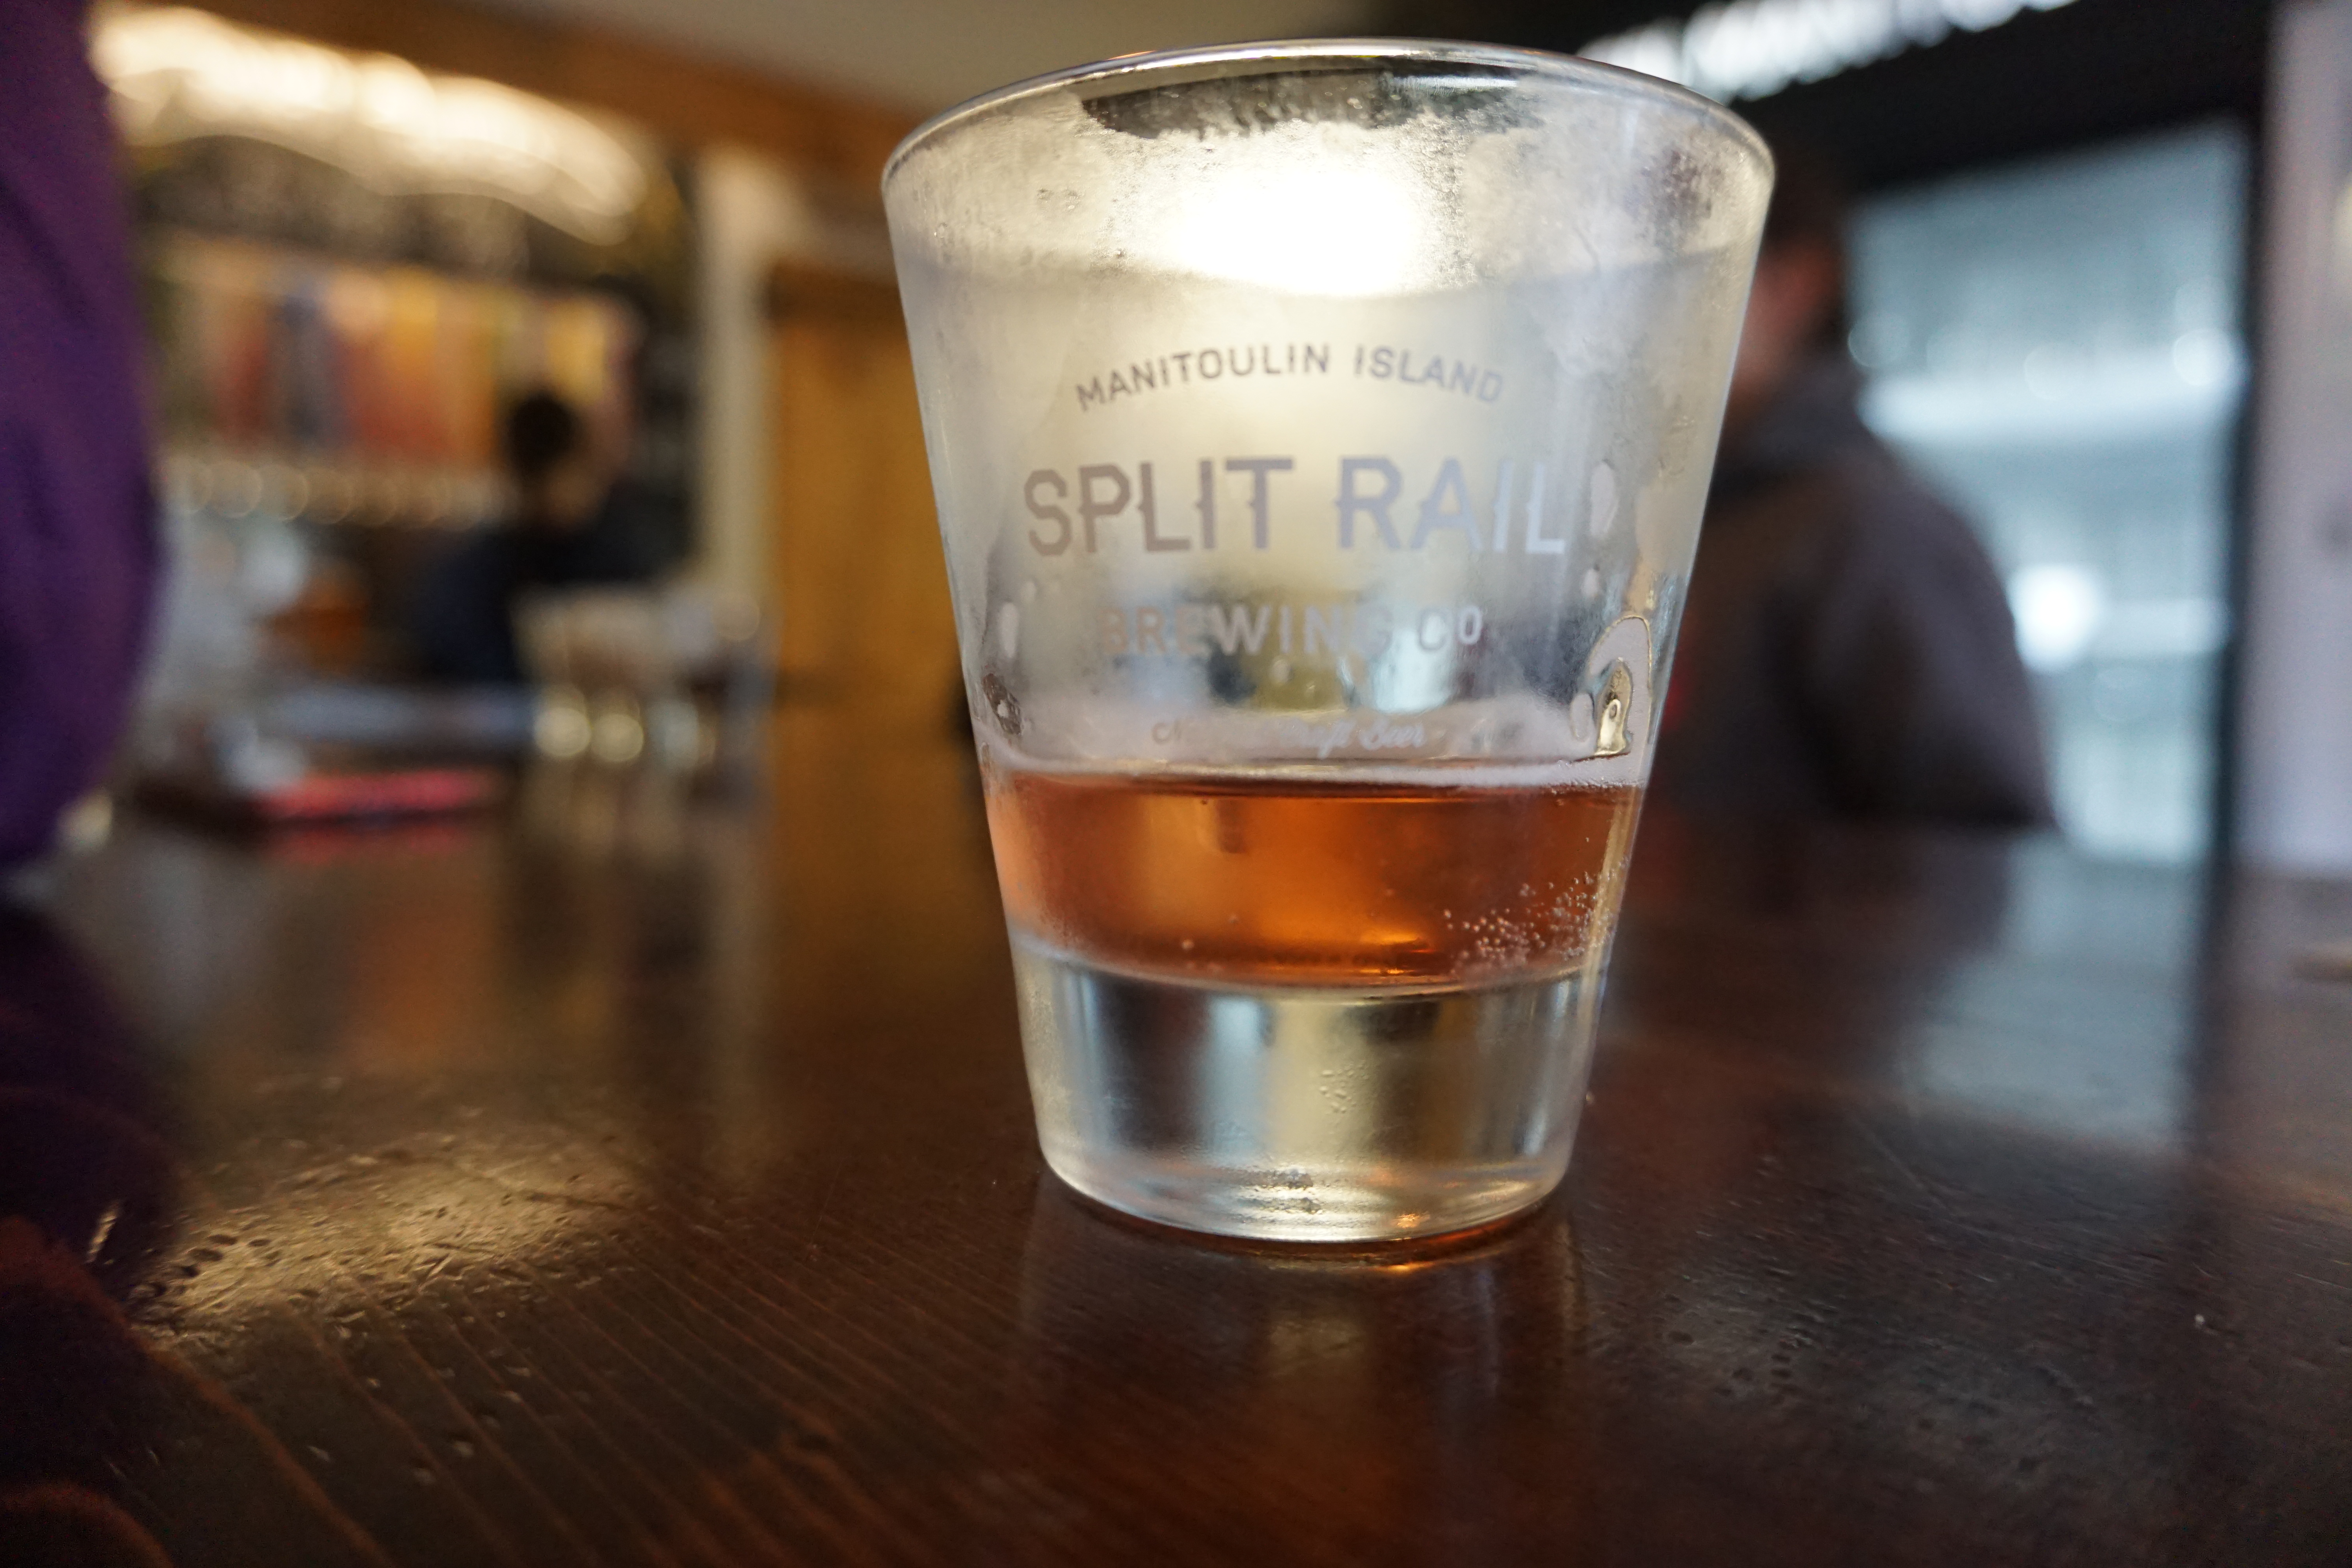 A nearly empty, frosted glass on a table with "Split Rail" printed on it.